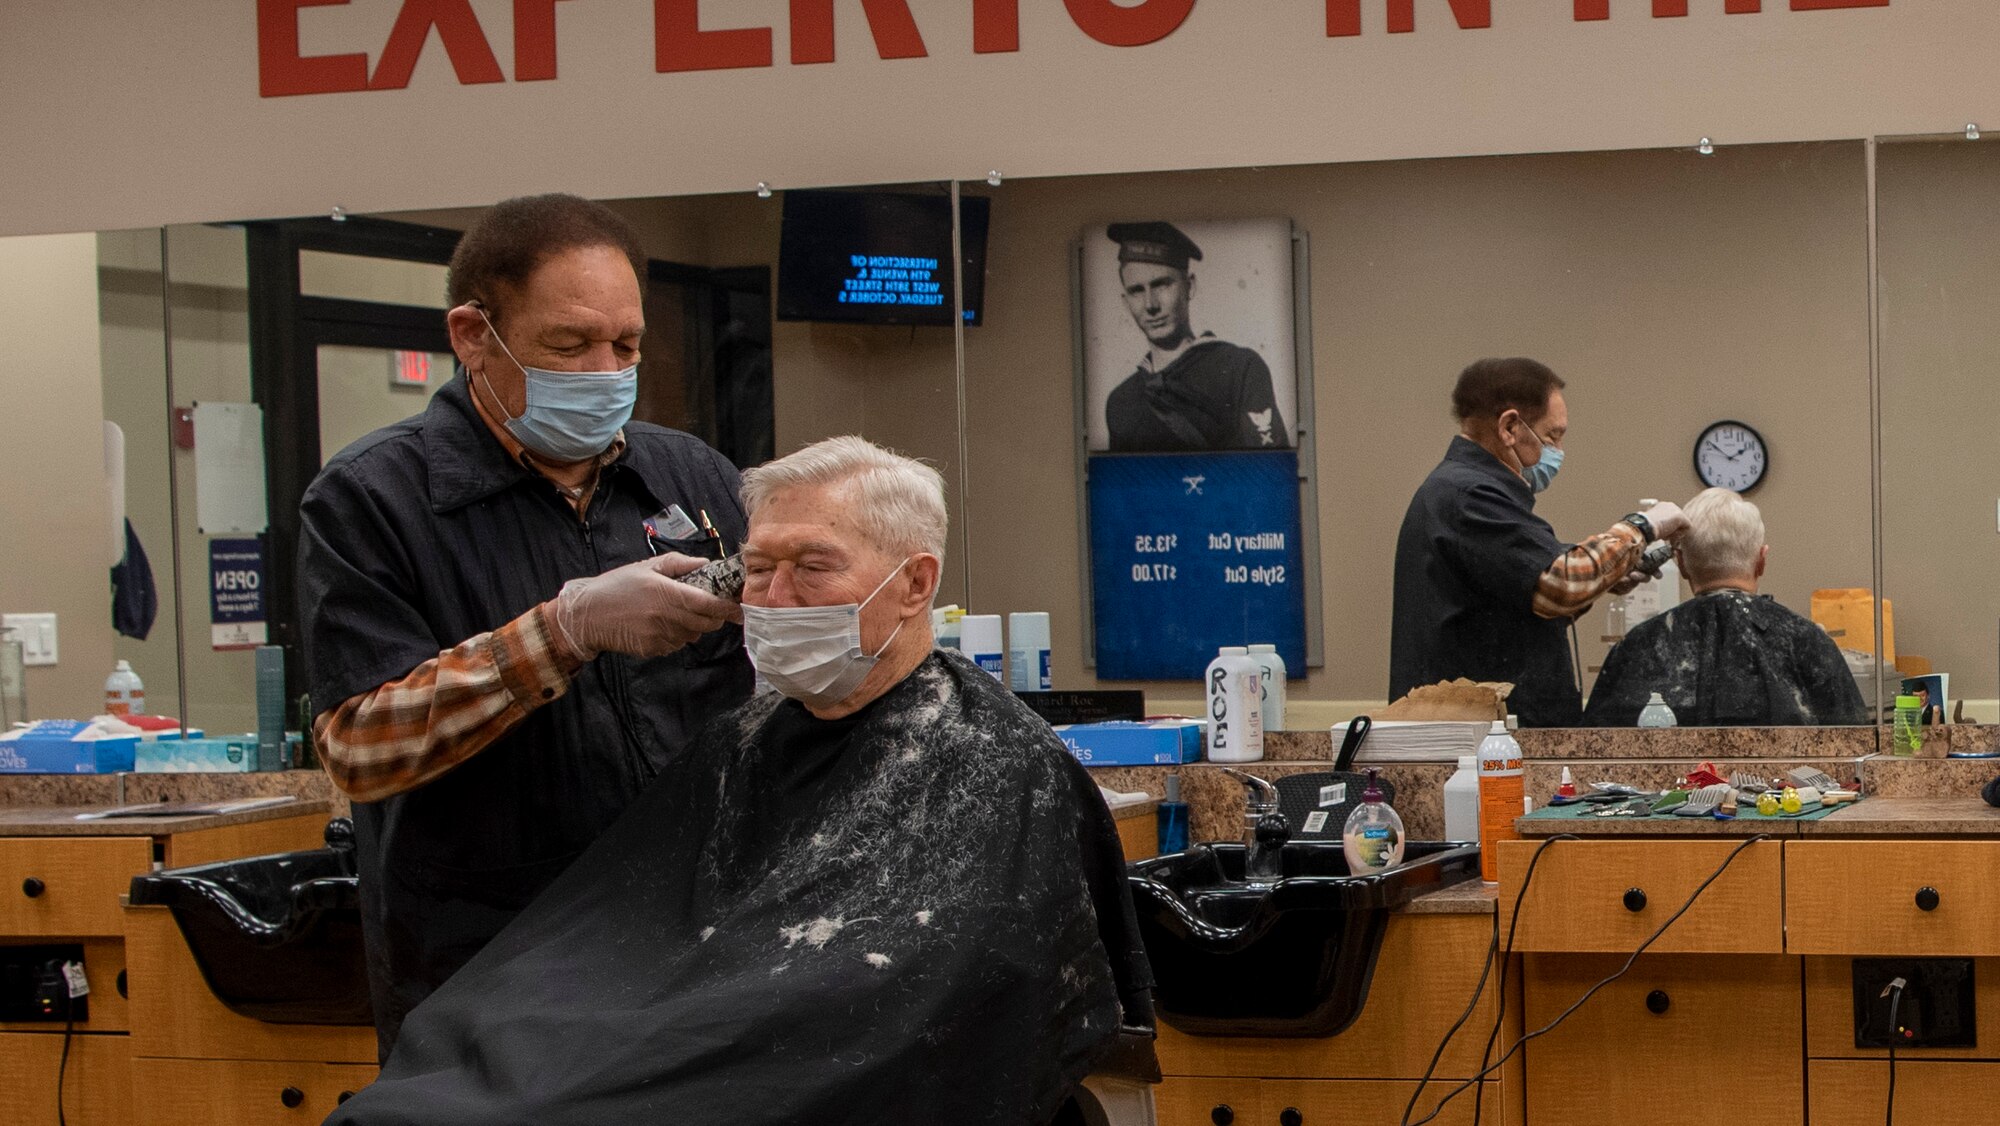 Richard Roe cuts the hair of a customer Feb. 5 at the Wright-Patterson Air Force Base Barber Shop. Meeting new people and being around the Air Force has kept him coming back to work for more than four decades, he says. (U.S. Air Force photo/Airman 1st Class Alexandria Fulton)